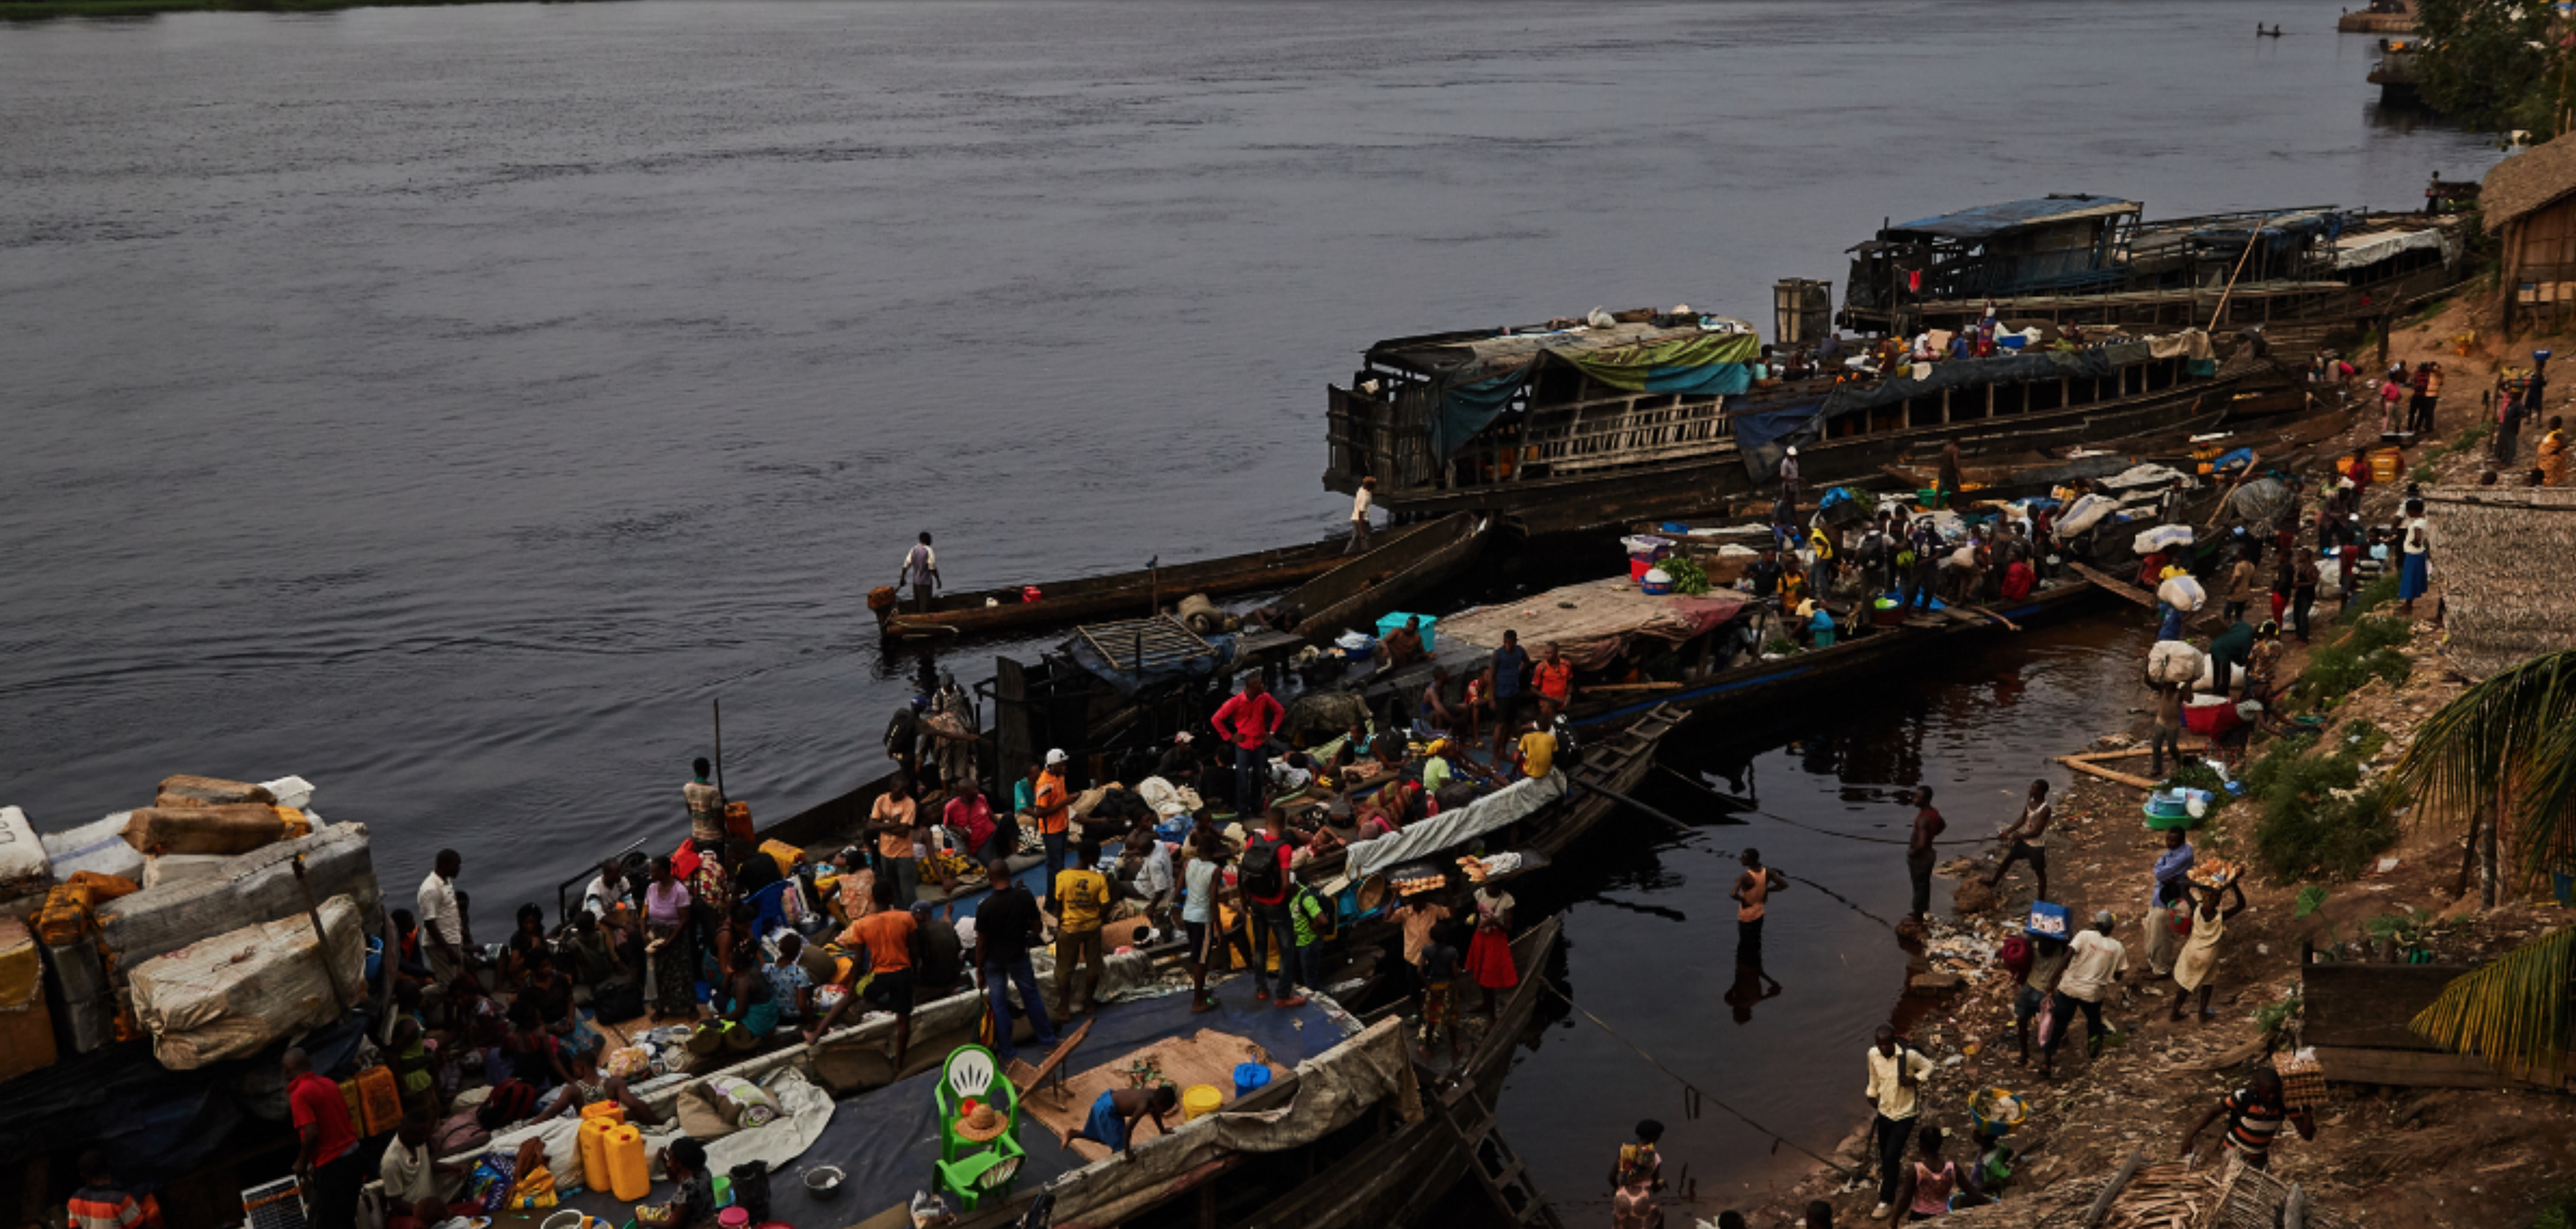 A busy trading port in the DRC. Image by Hugh Kinsella Cunningham. Democratic Republic of the Congo, 2019.